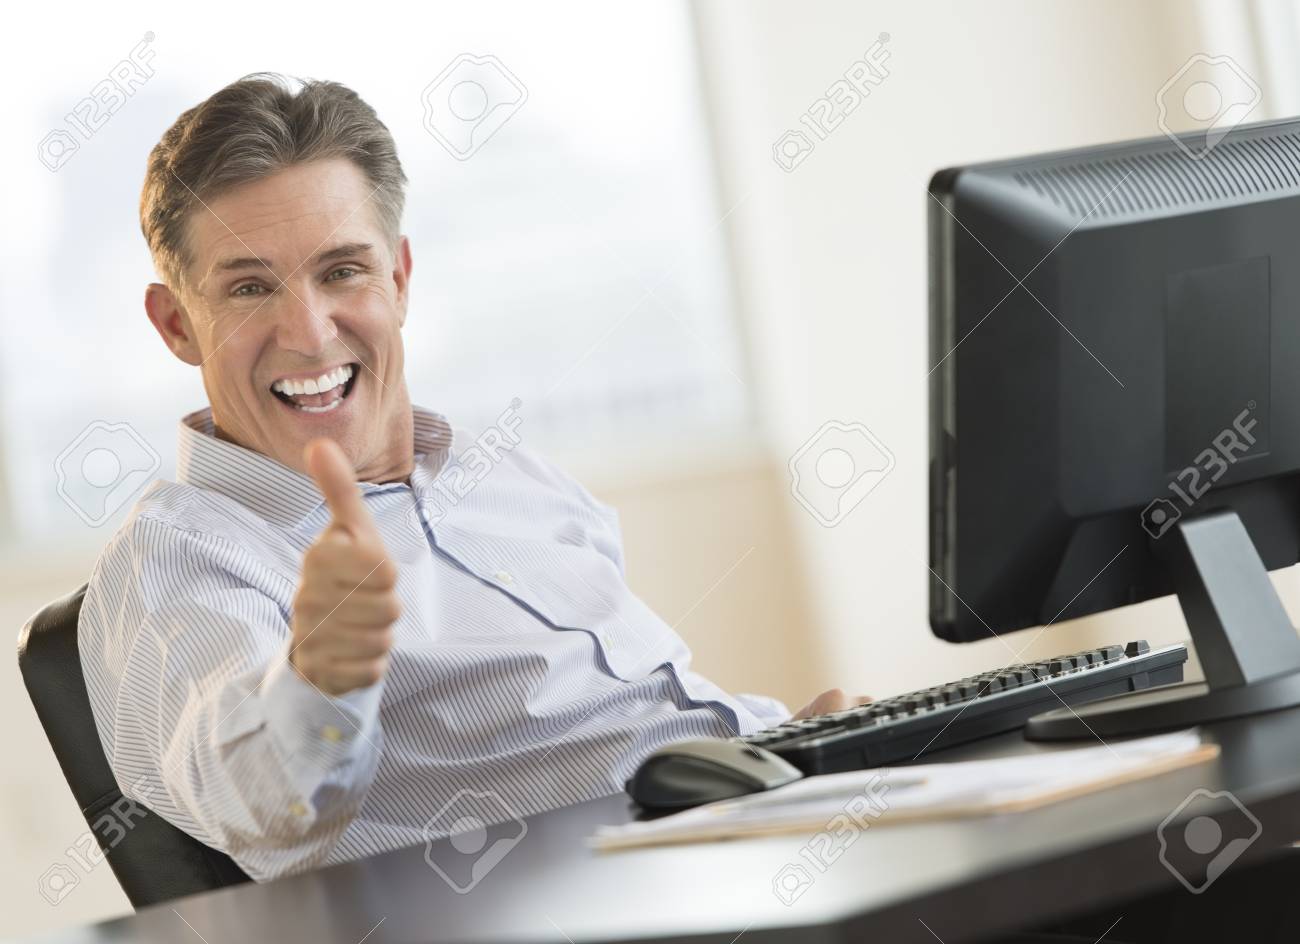 22079719-excited-mature-businessman-gesturing-thumbs-up-while-sitting-at-computer-desk-in-office.jpg